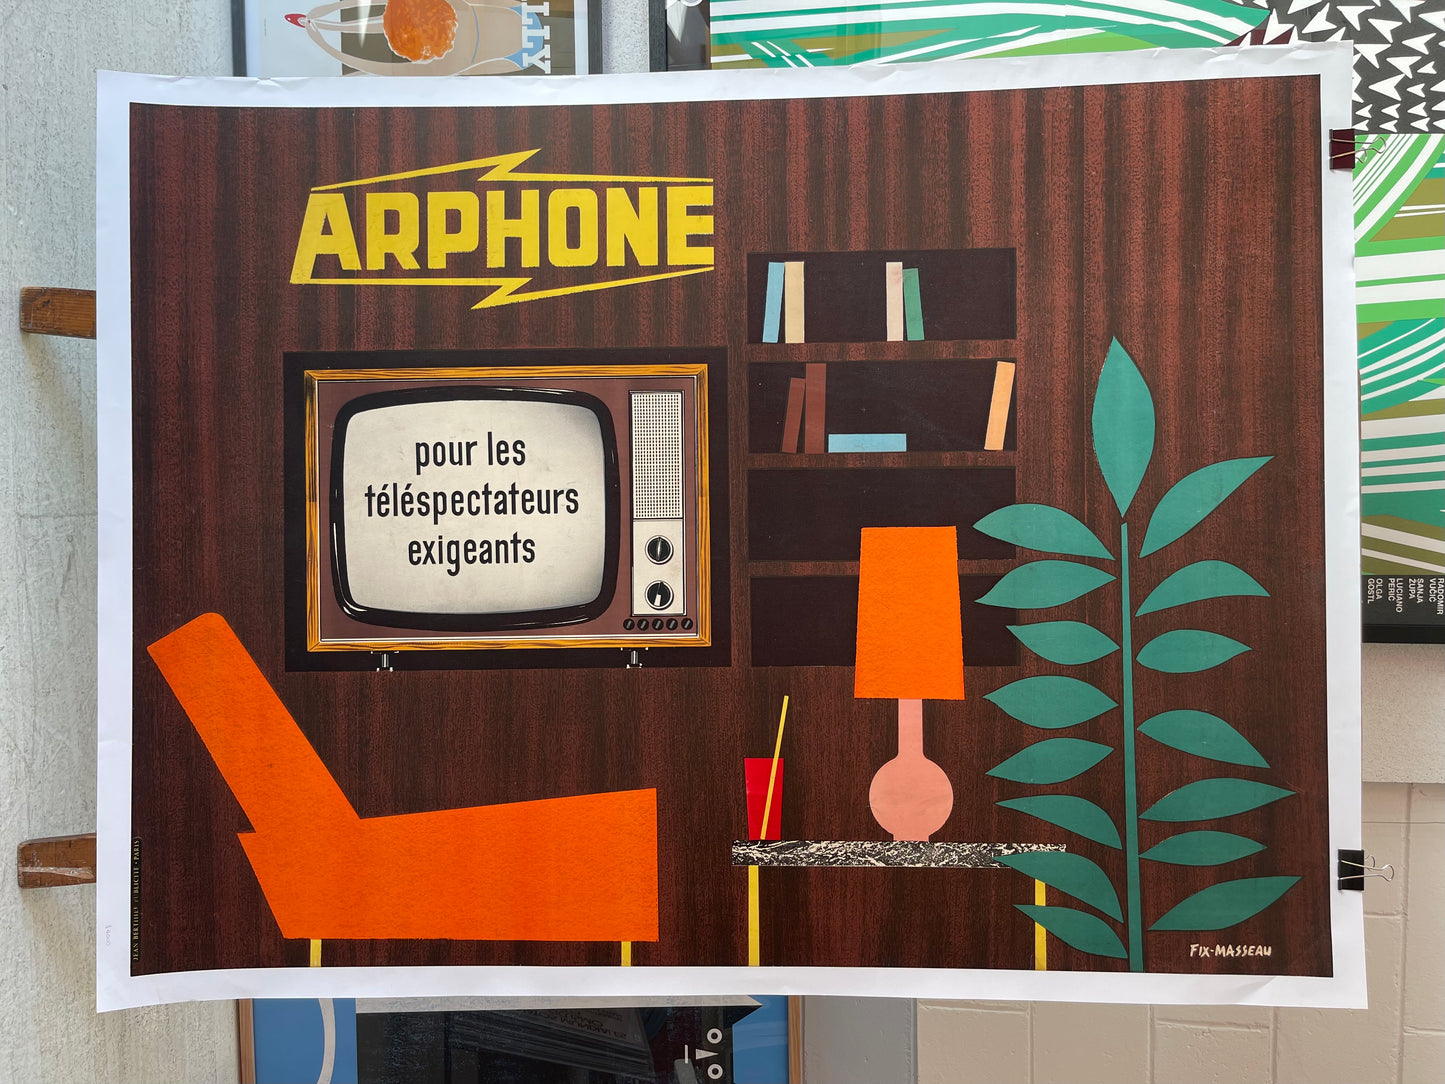 Arphone Televisions Advert by Fix-Masseau